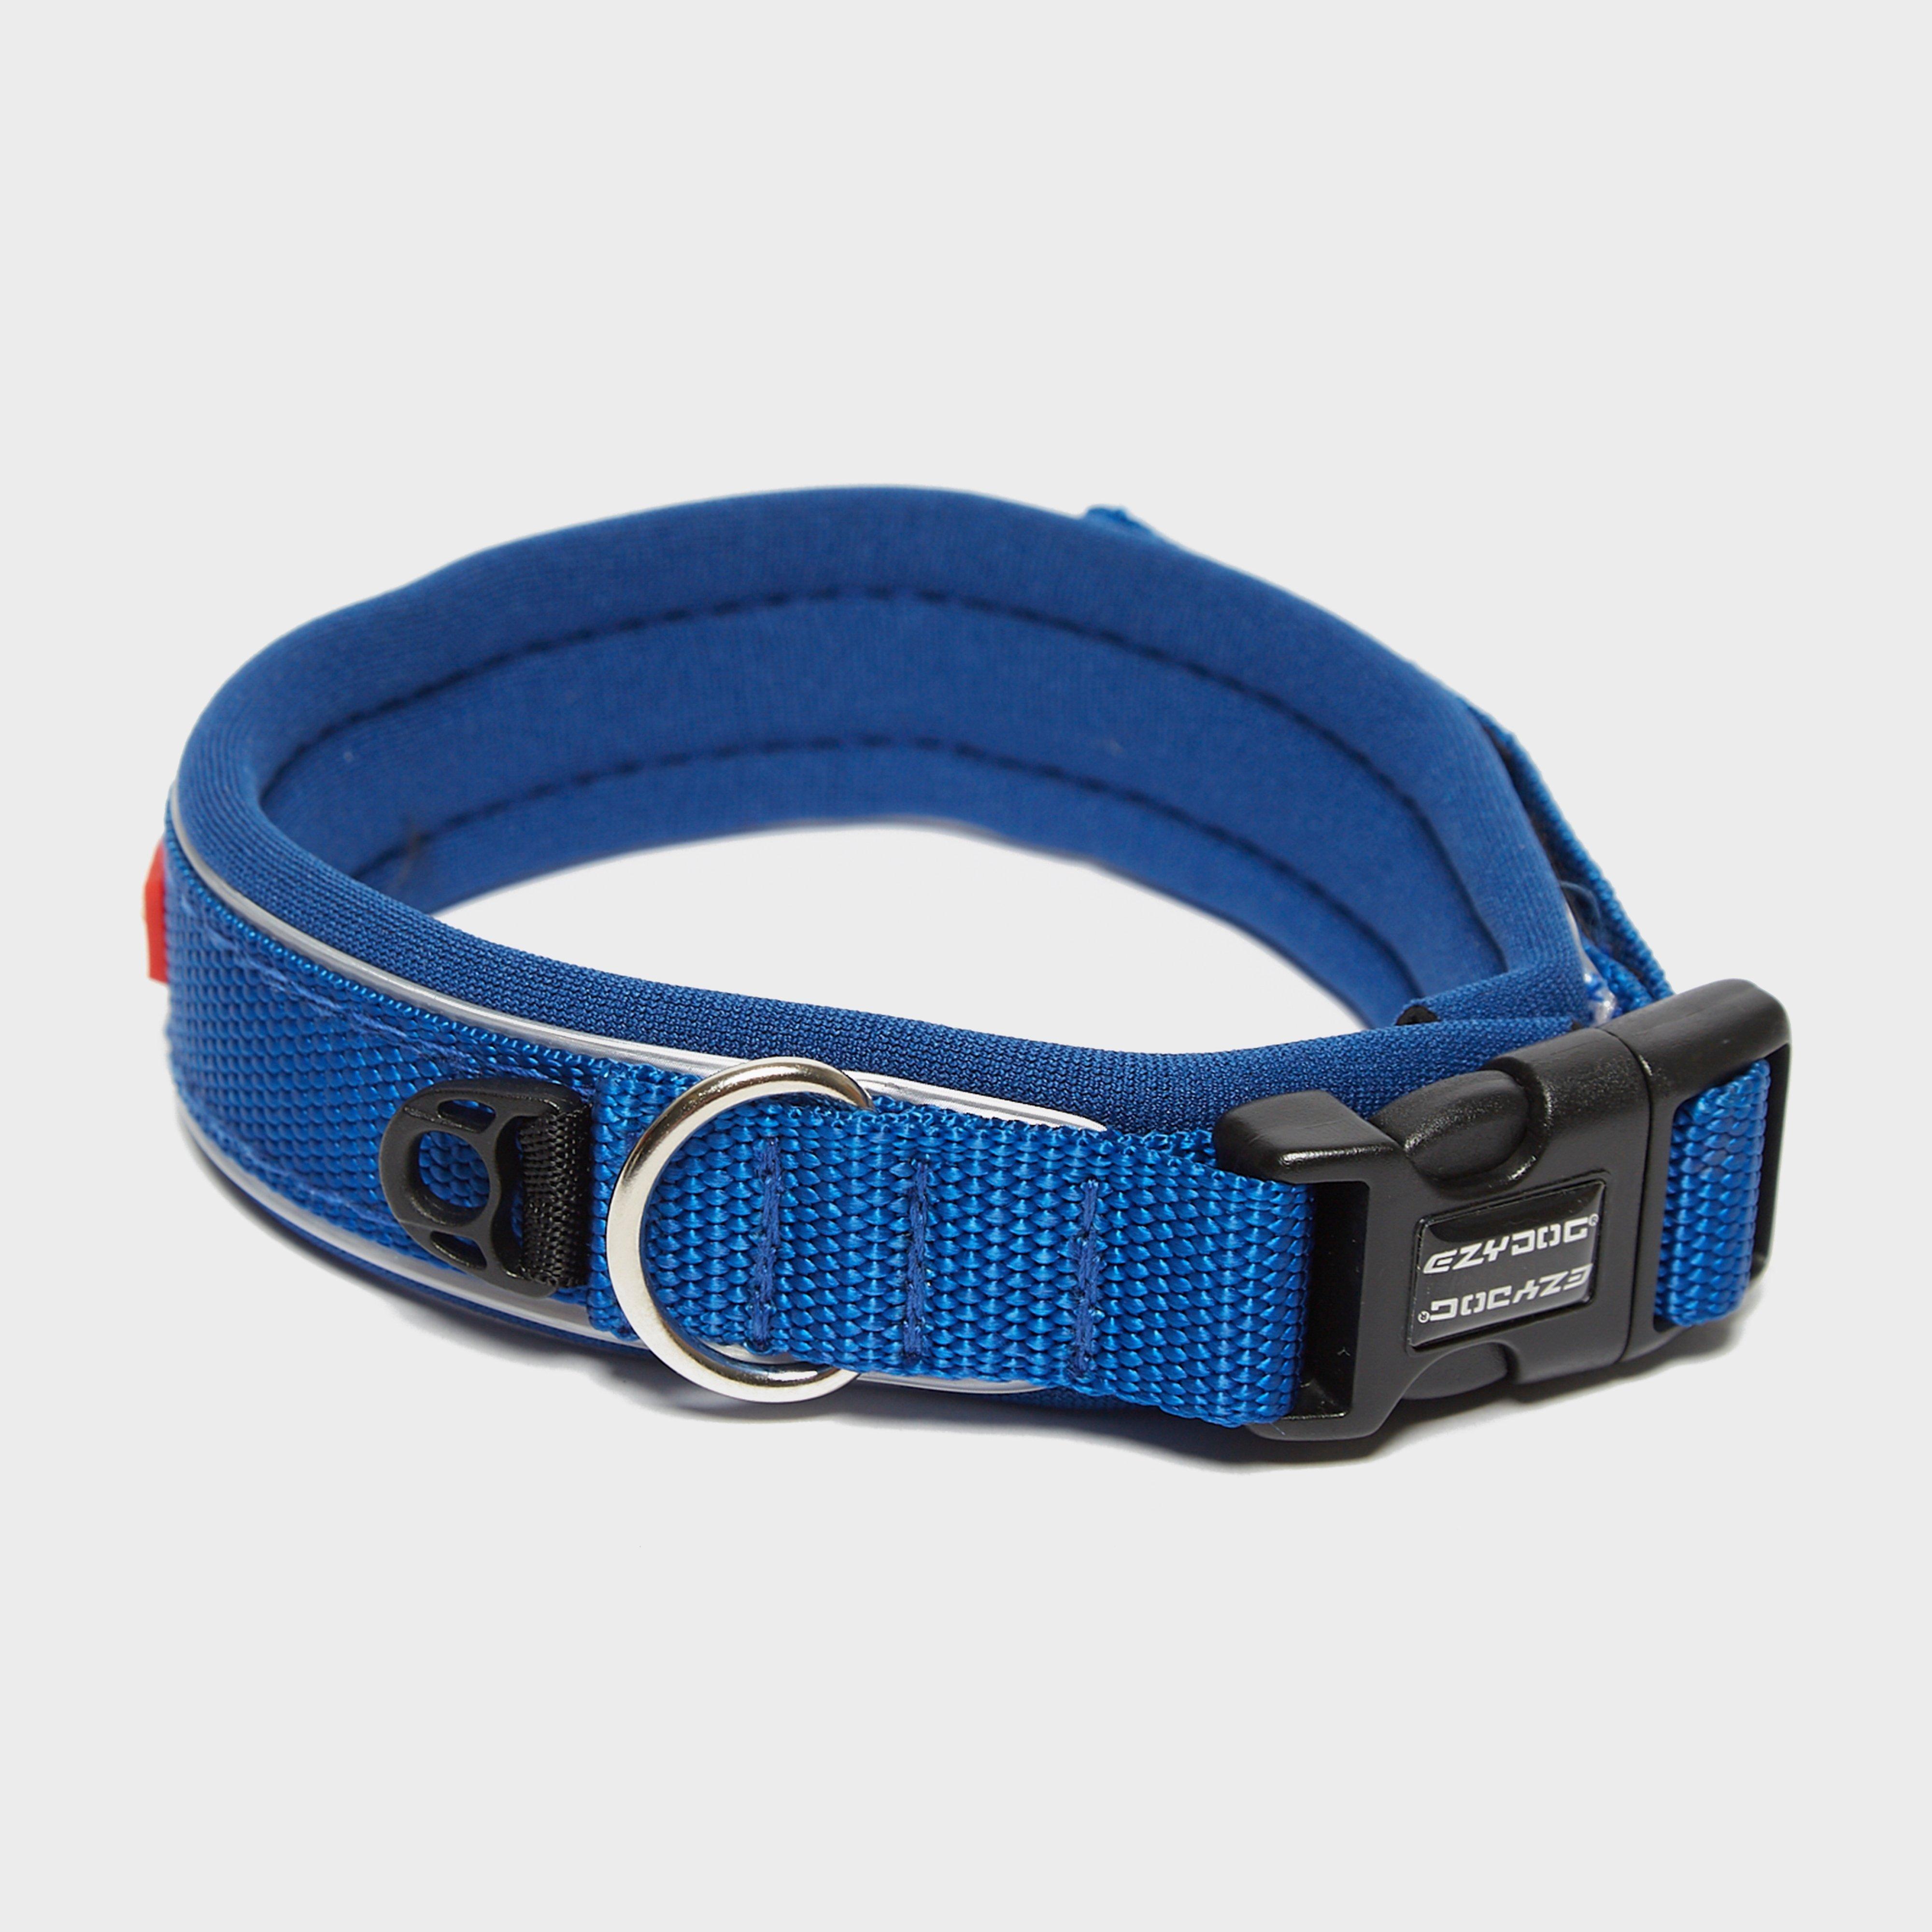 Image of Ezy-Dog Classic Neo Collar Small - Blue/Mbl, Blue/MBL